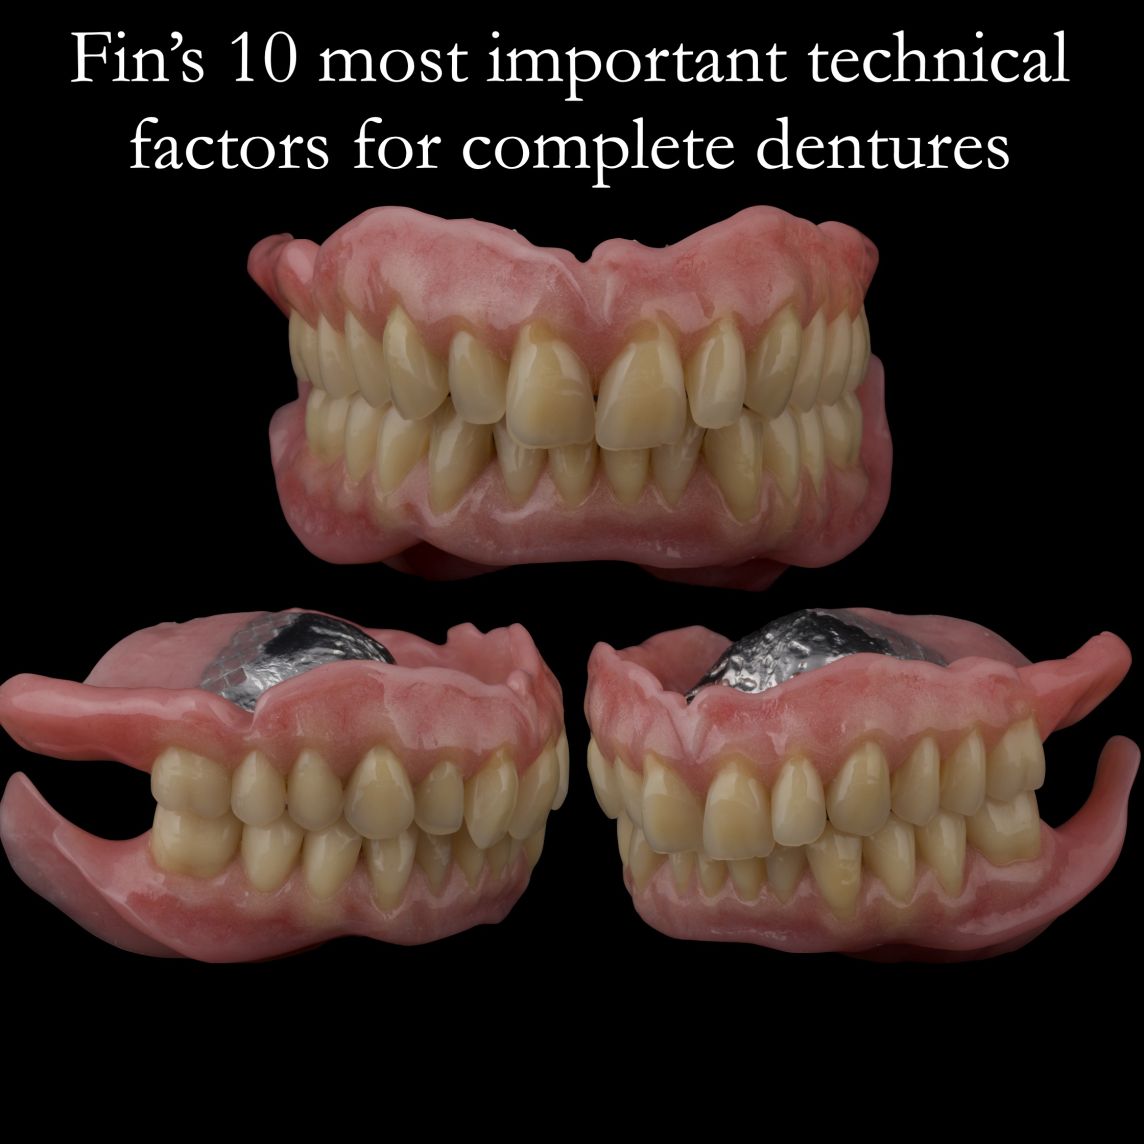 My 10 most important technical factors in producing complete dentures with superb aesthetics and function